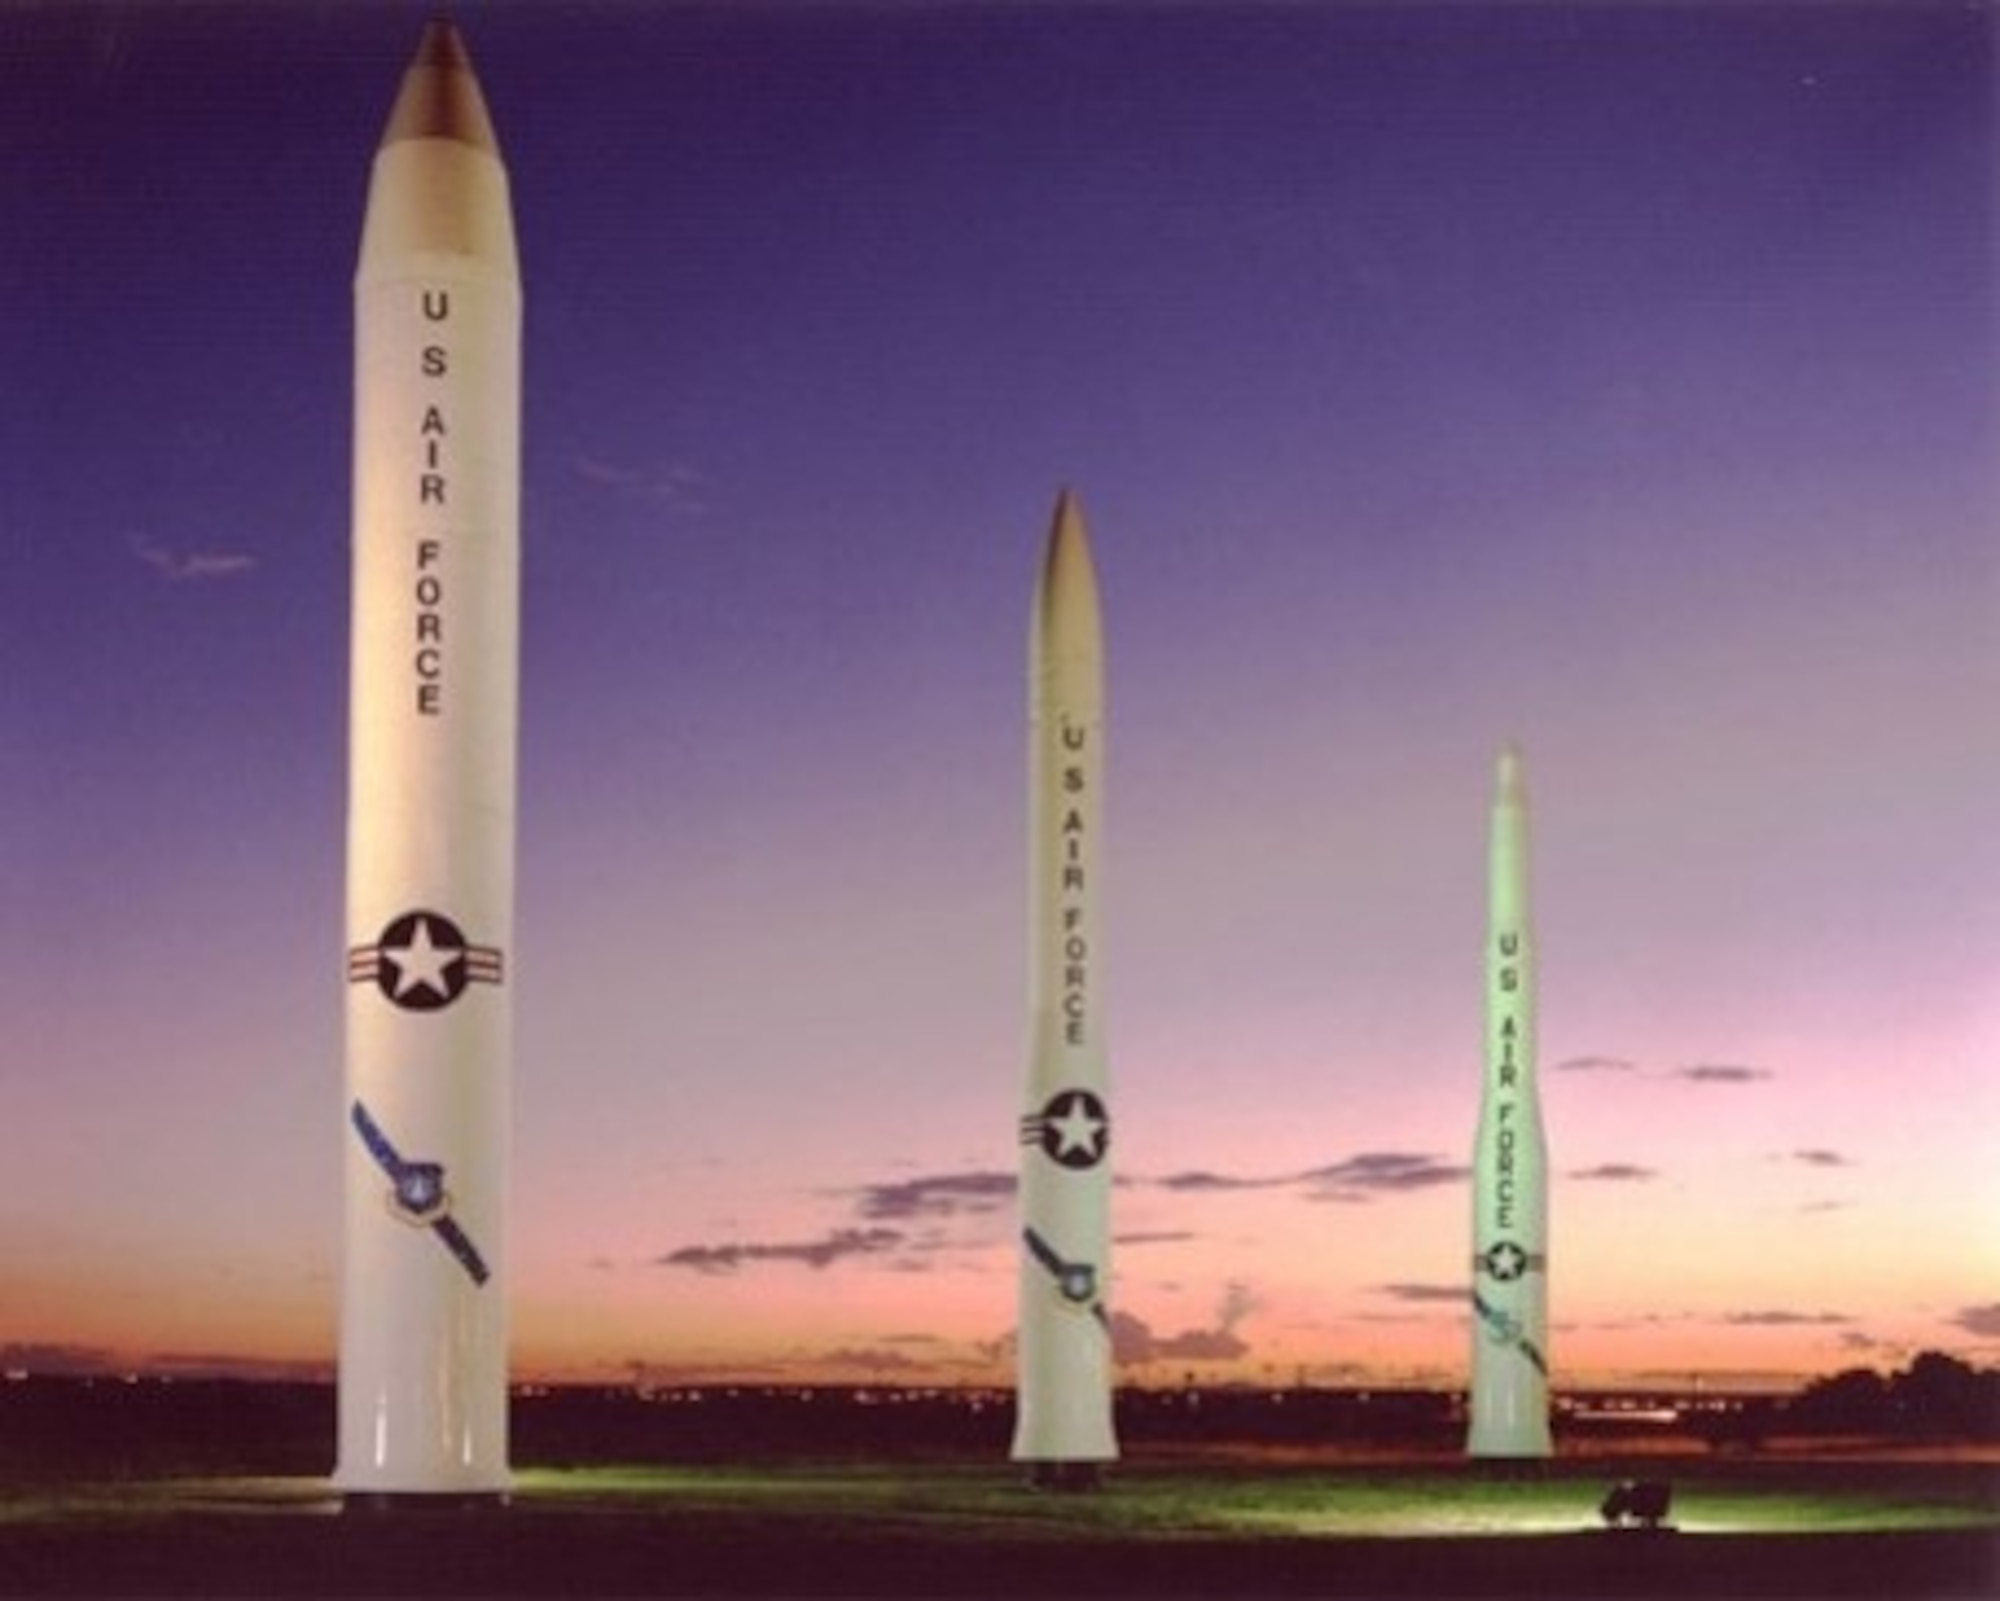 The Oklahoma City Air Logistics Complex maintains every propulsion system in the Air Force inventory, while the Ogden Air Logistics Complex maintains every landing gear system in the Air Force inventory. The entire Air Force Intercontinental Ballistic Missile fleet is housed within the OSI PF Det. 2 Area of Responsibility. (Courtesy photo)